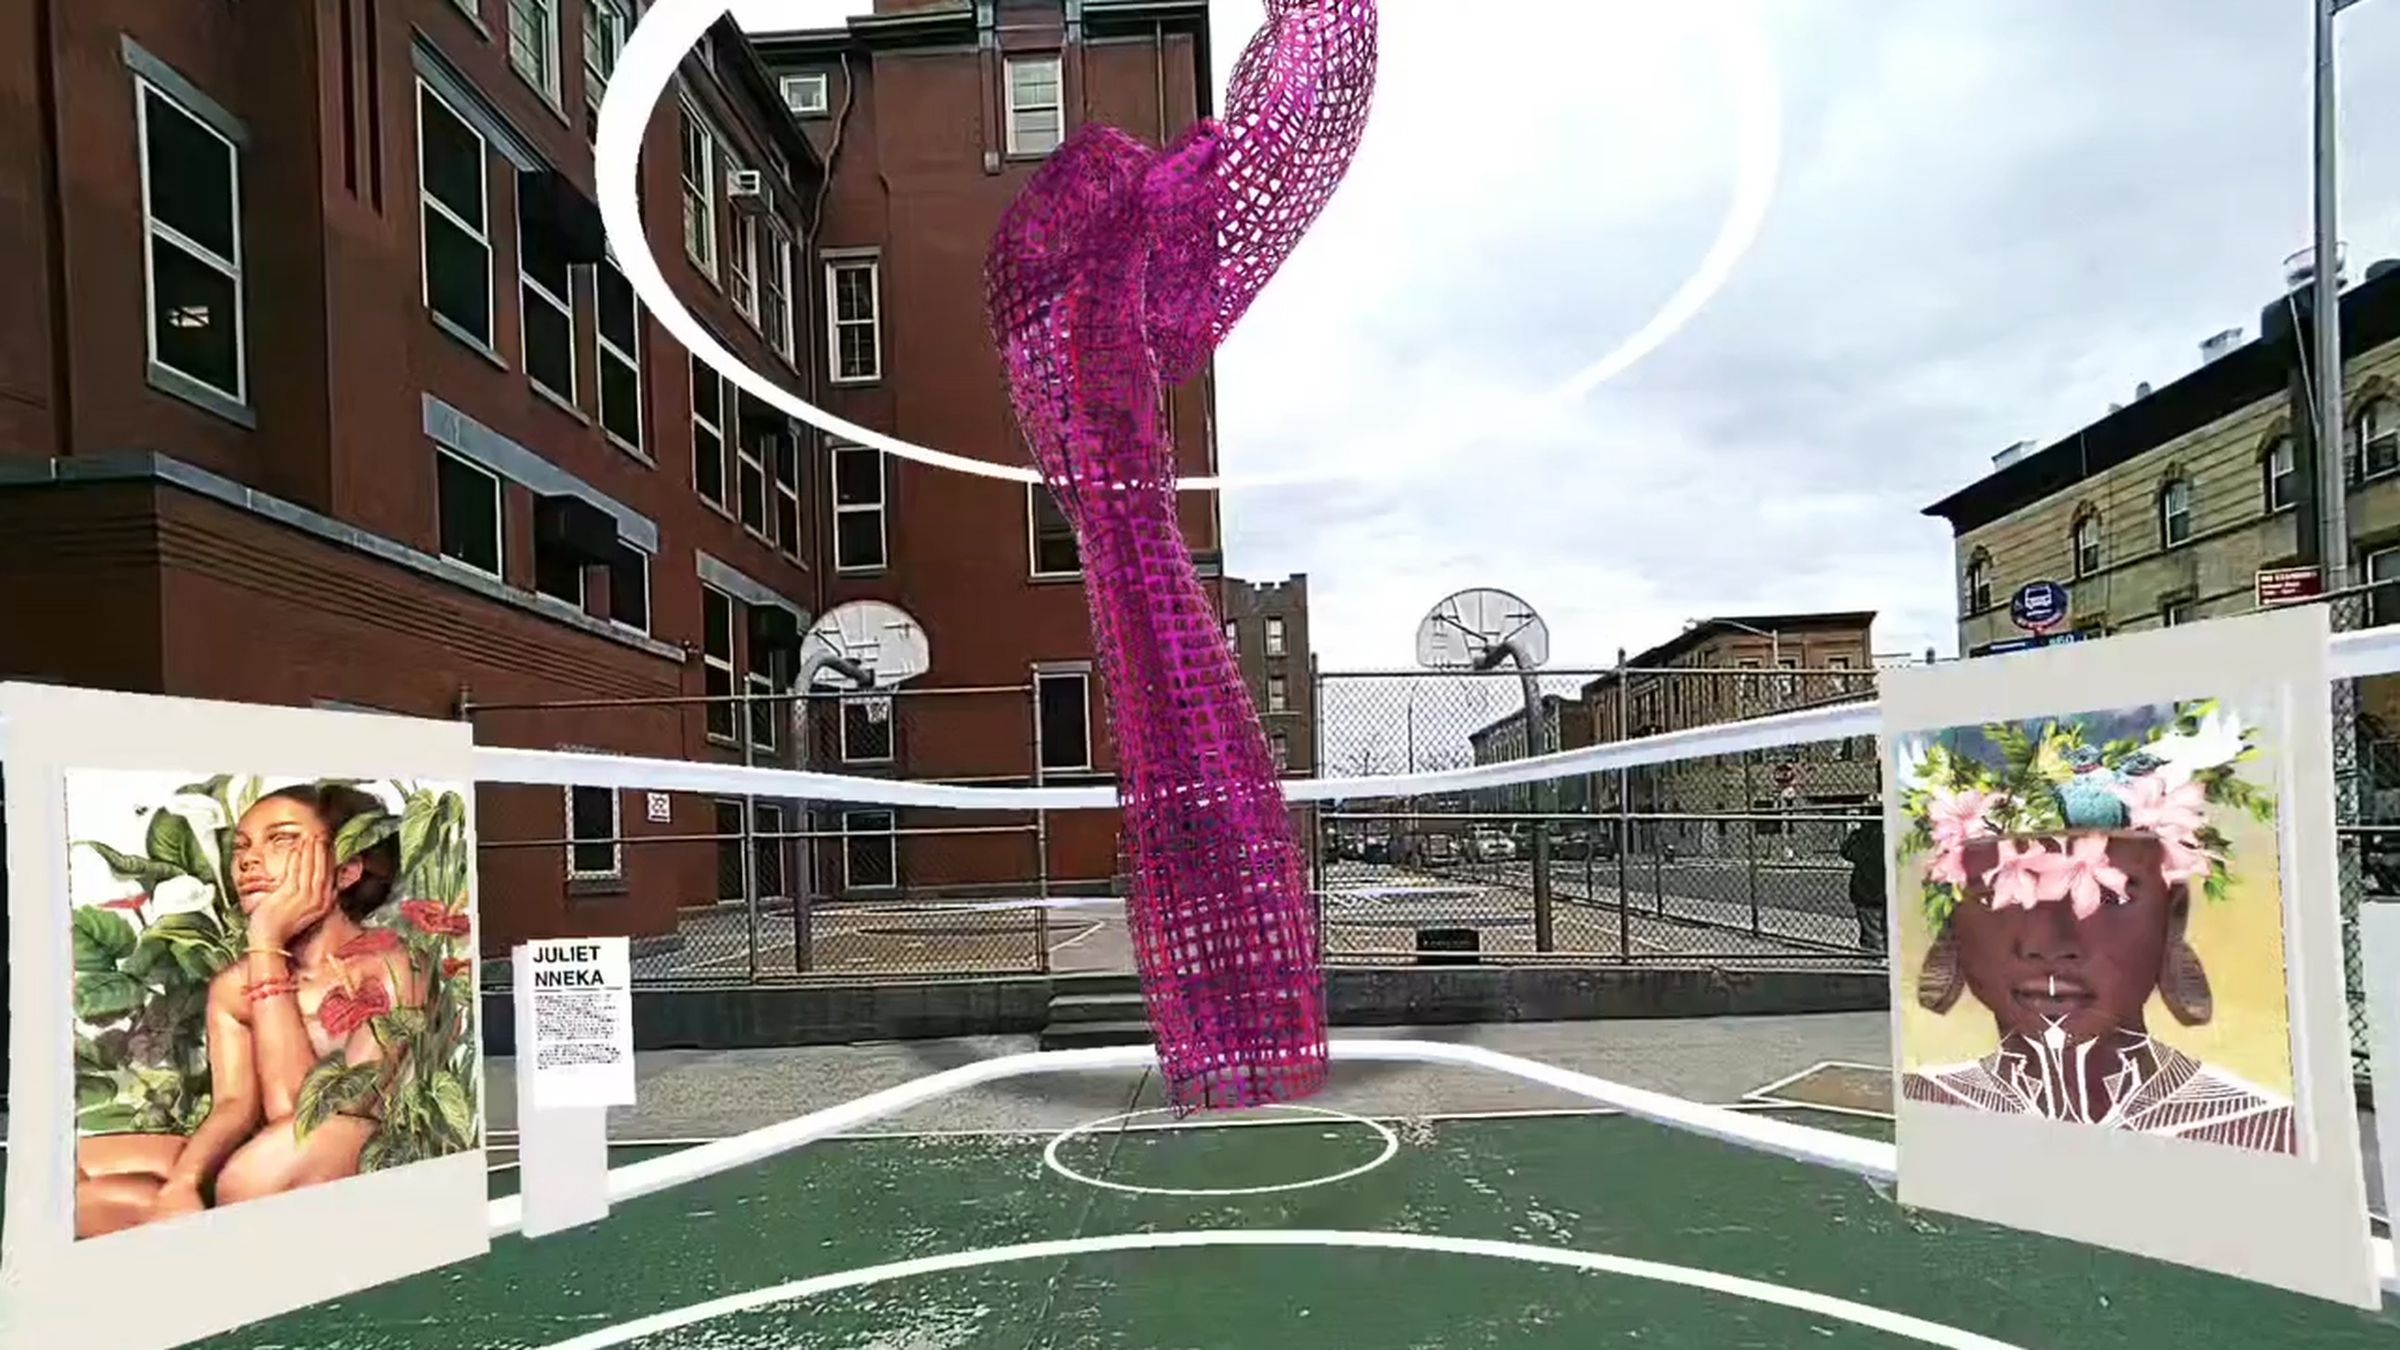 An image showing artworks appearing in AR on a basketball court. It’s a first person view through the new Spectacles.